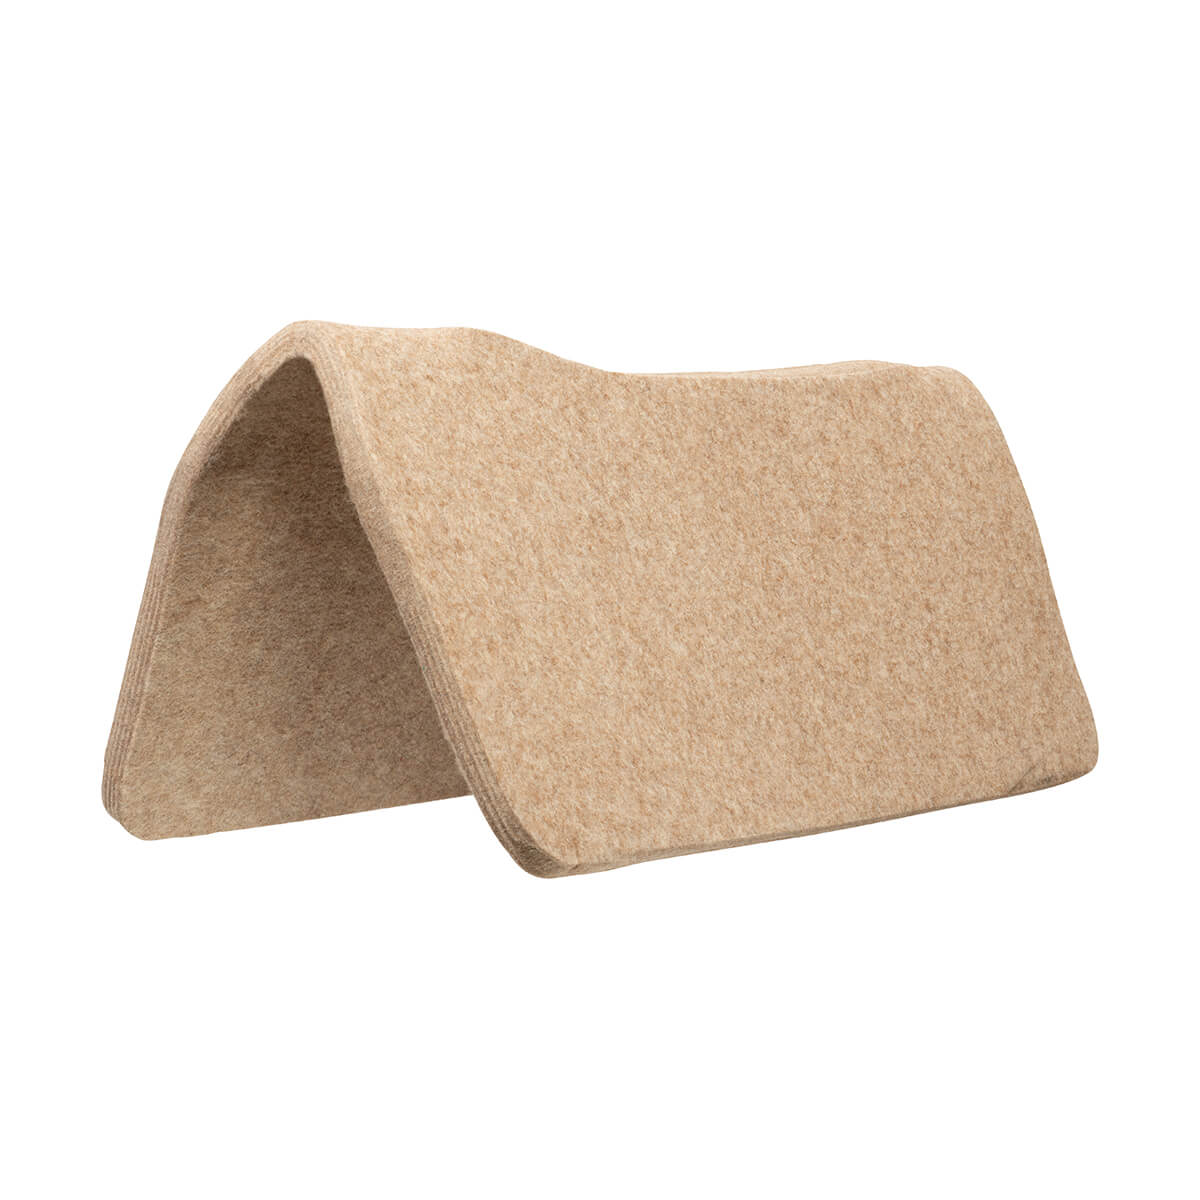 Contoured Felt Saddle Pad Liner - 1/2-in x 30-in x 30-in